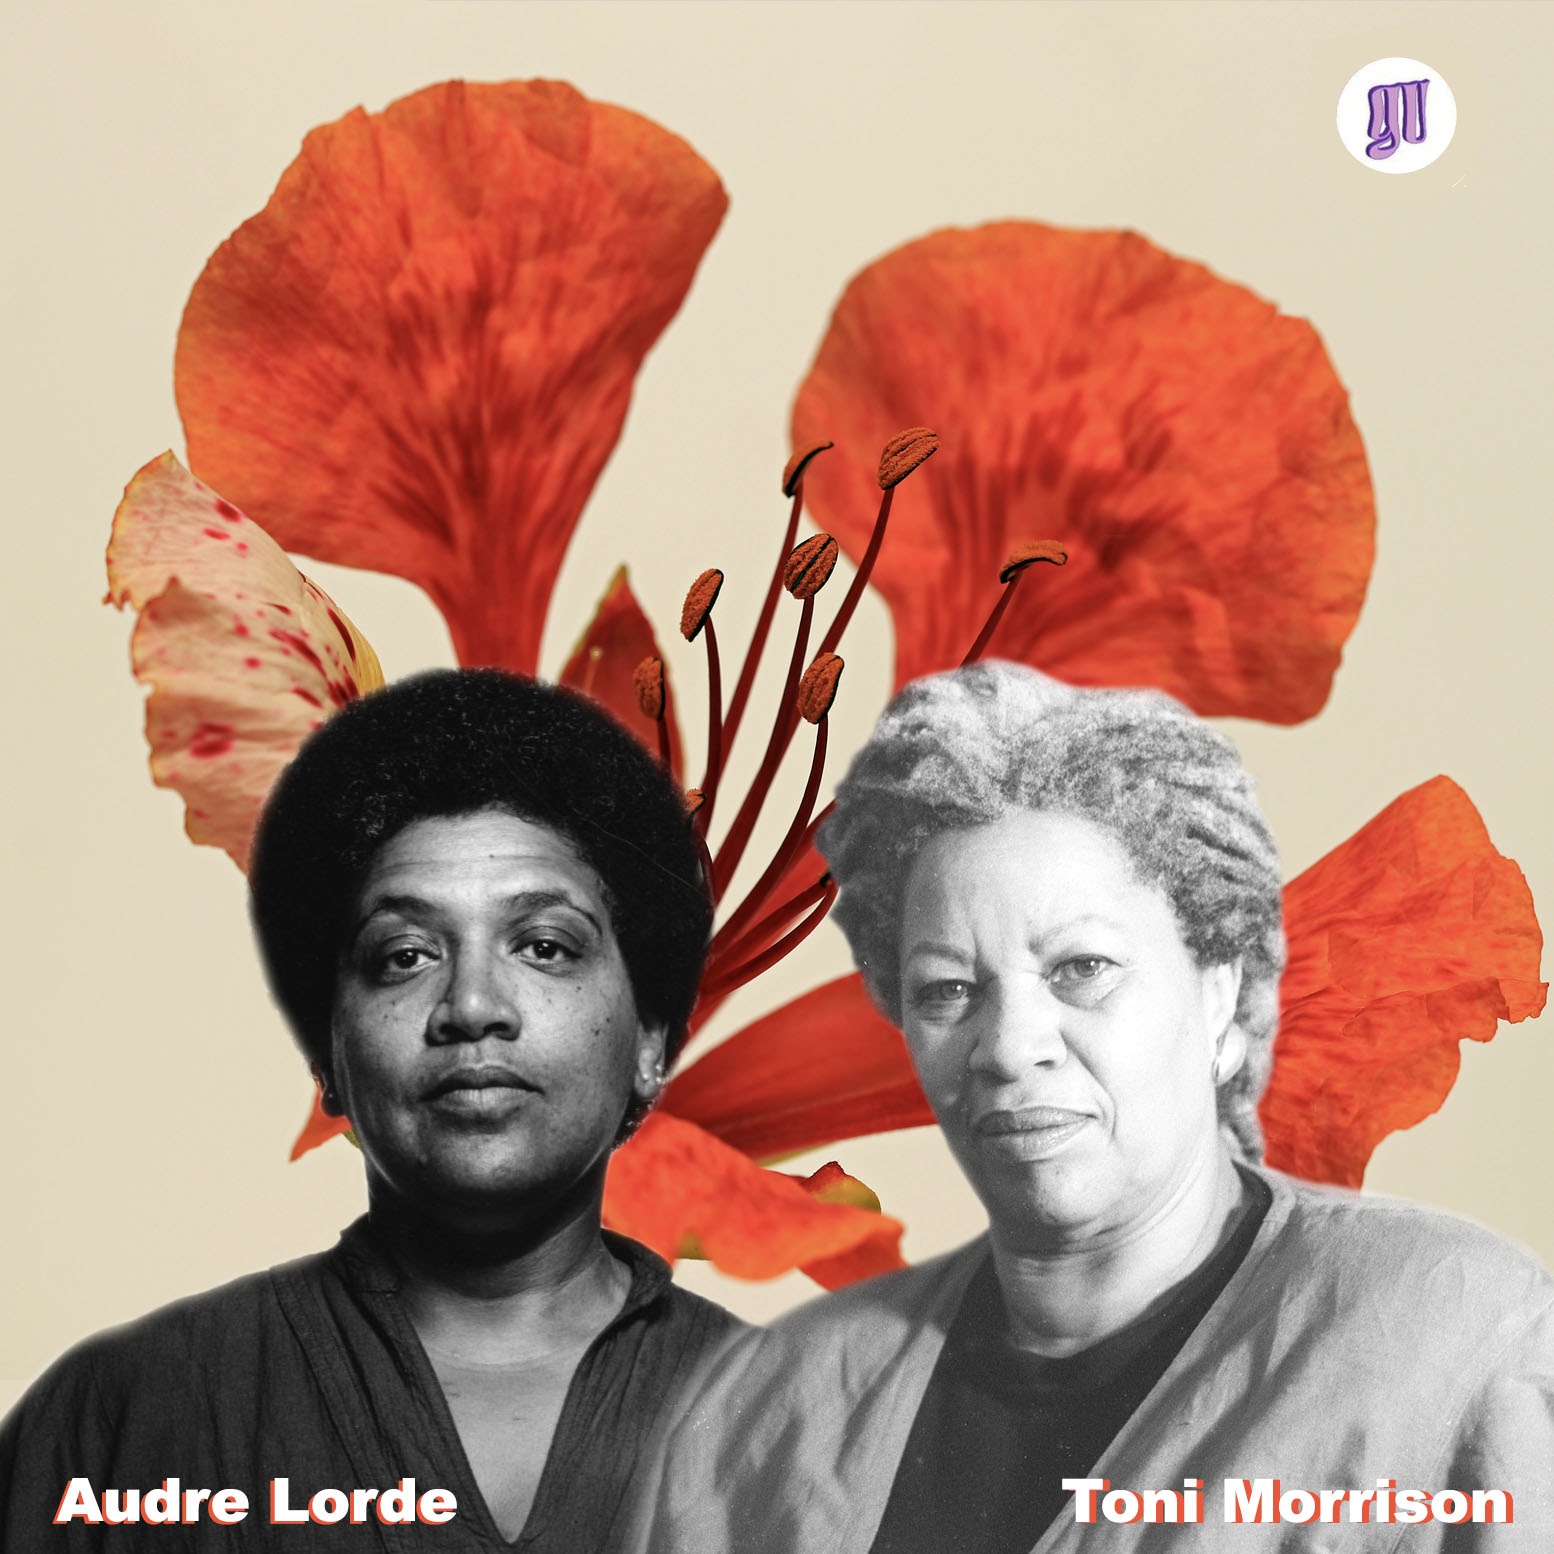 Honor Authors Toni Morrison And Audre Lorde By Practicing Self-Care